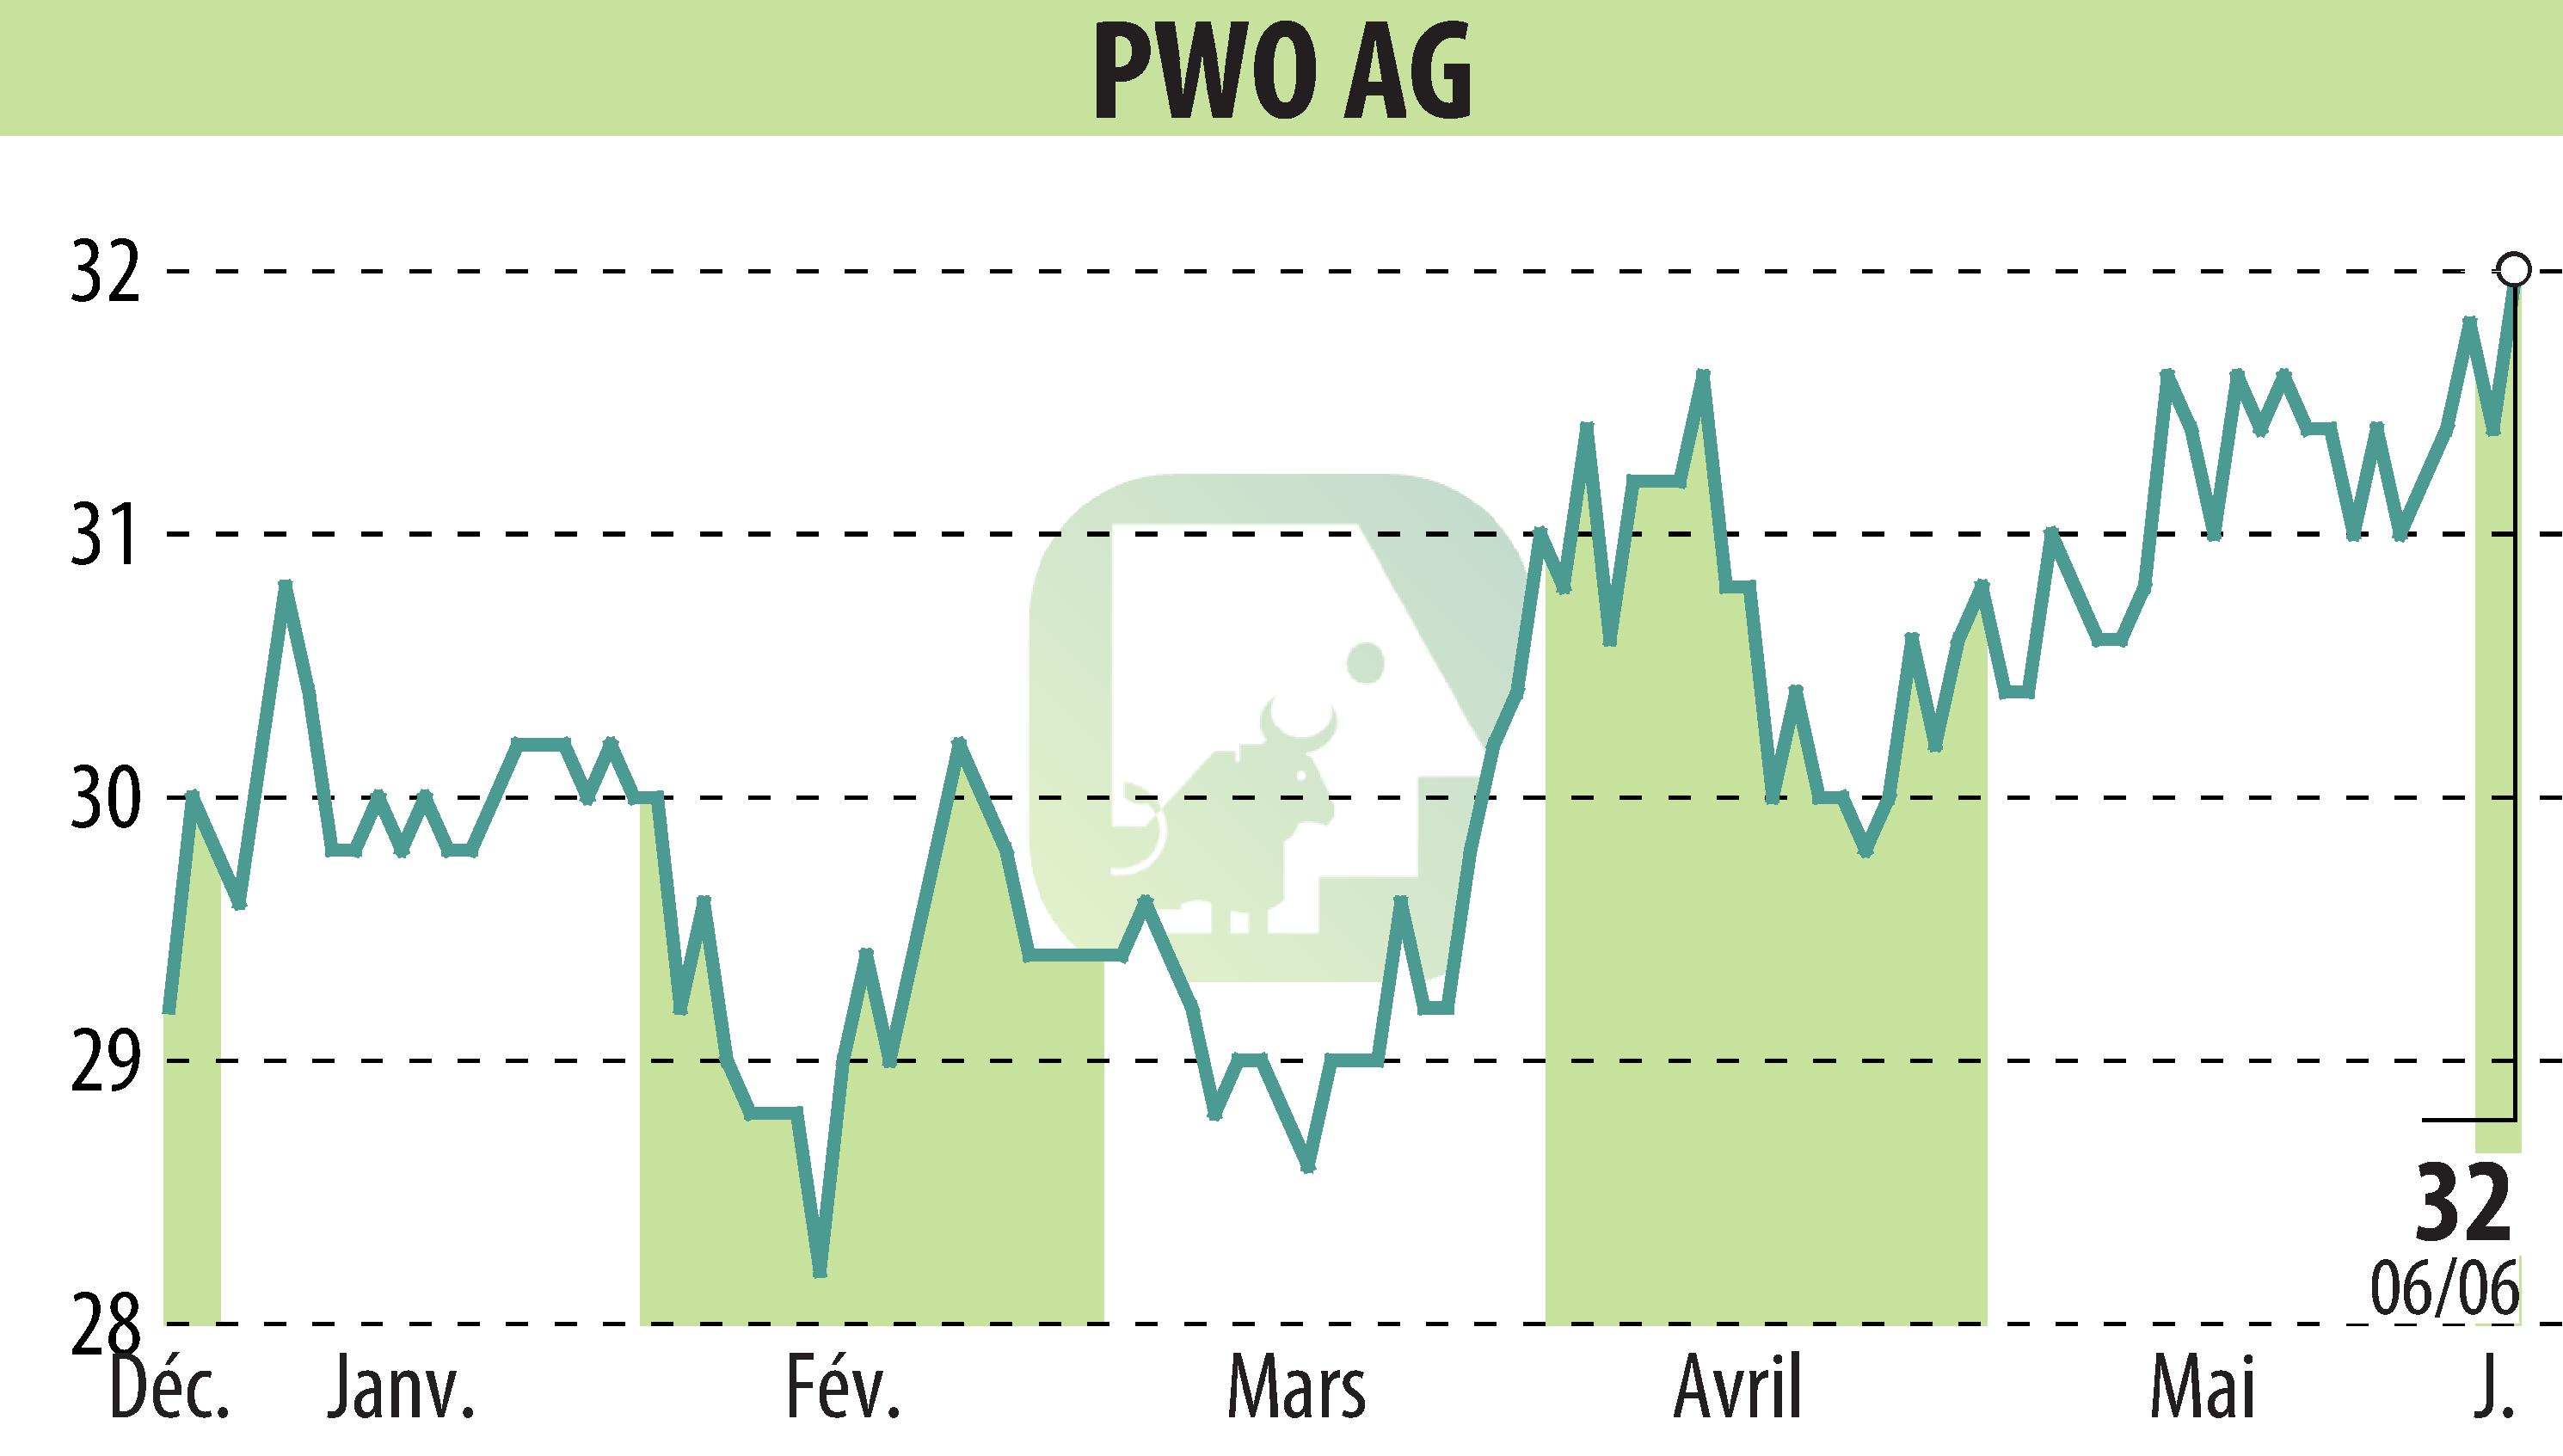 Stock price chart of Progress-Werk Oberkirch AG (EBR:PWO) showing fluctuations.